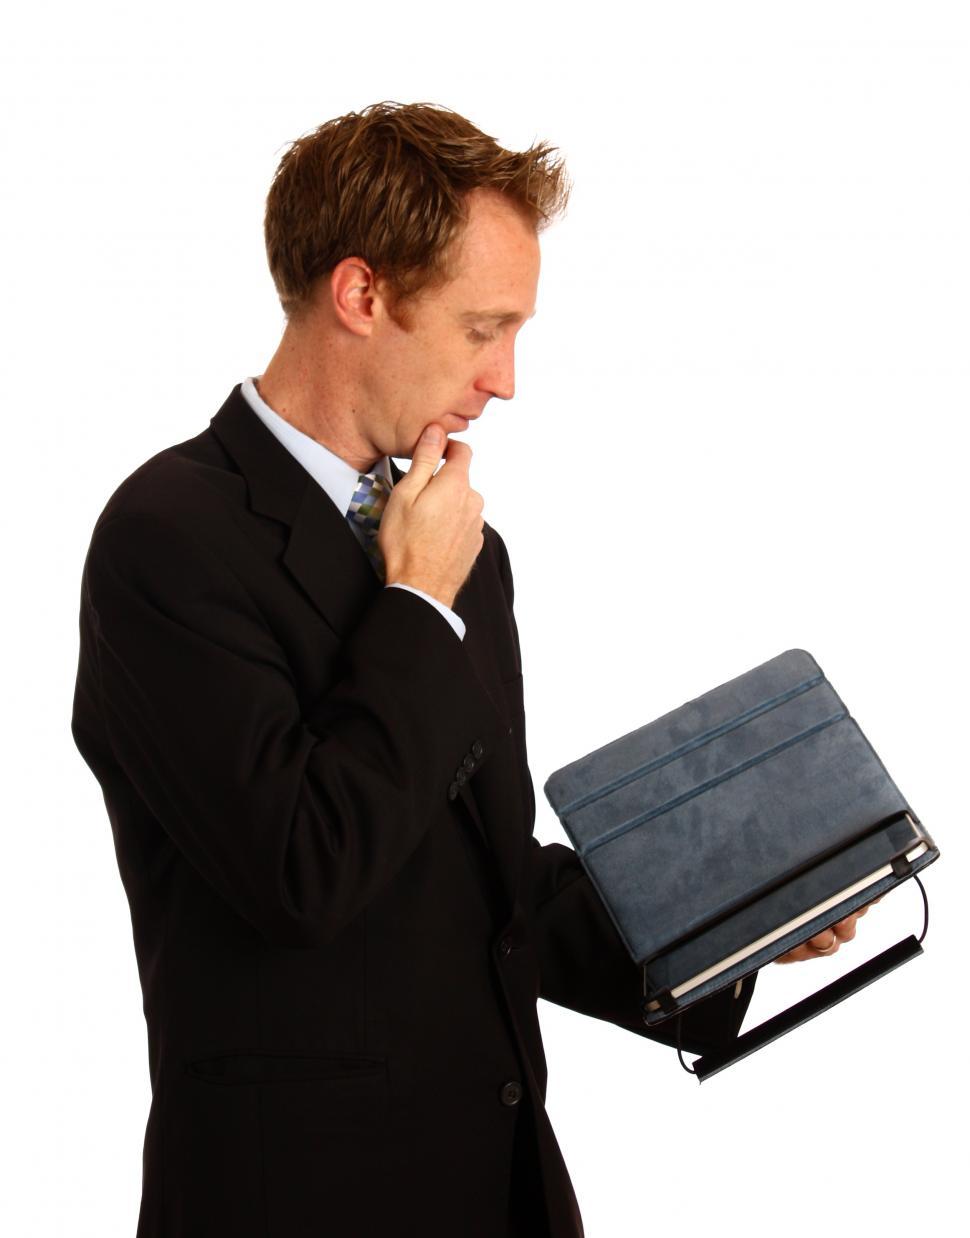 Free Image of A young businessman holding a tablet computer 